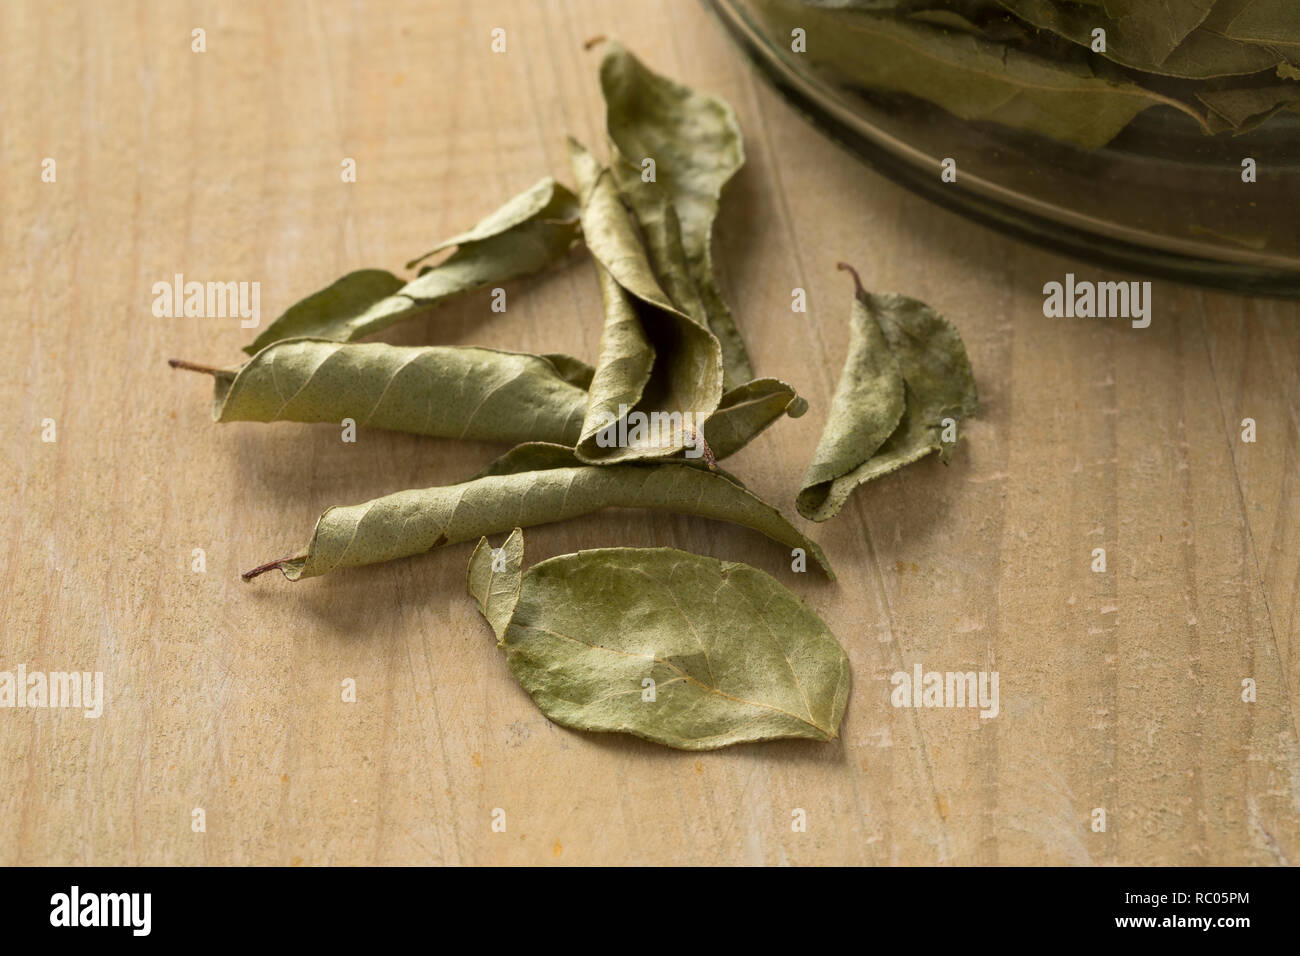 Dried aromatic curry leaves close up Stock Photo